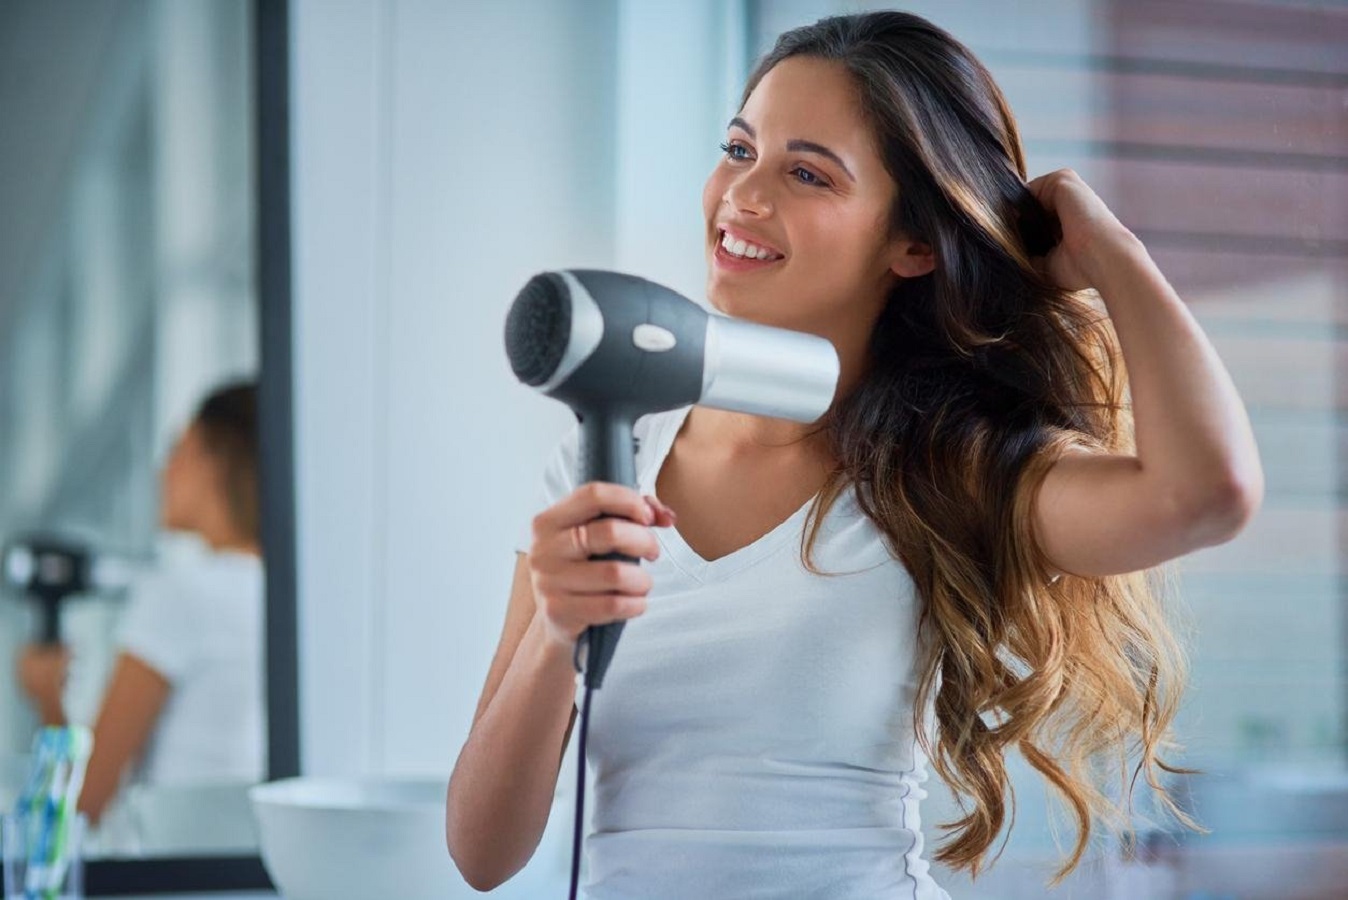 4 Best Philips Hair Dryers for January 2022